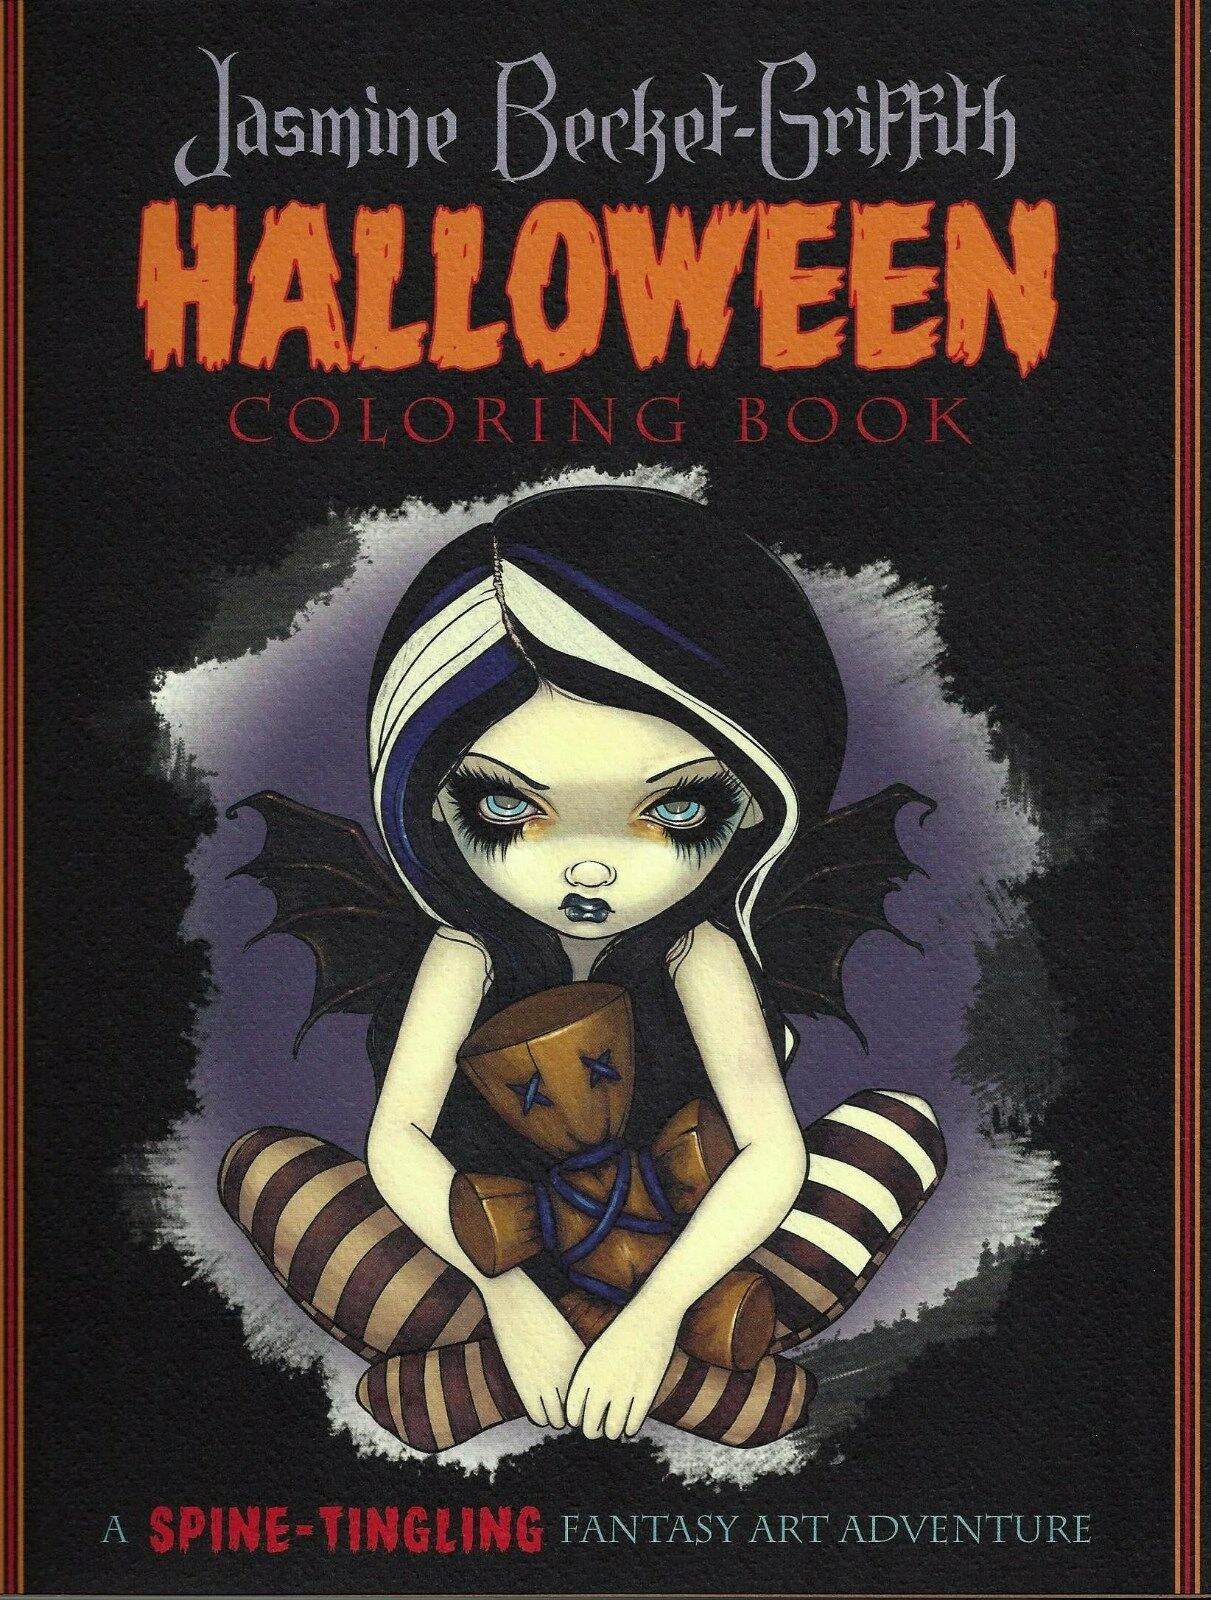 Halloween Coloring Book Jasmine Becket-griffith Goth Dark Fairy Color Book